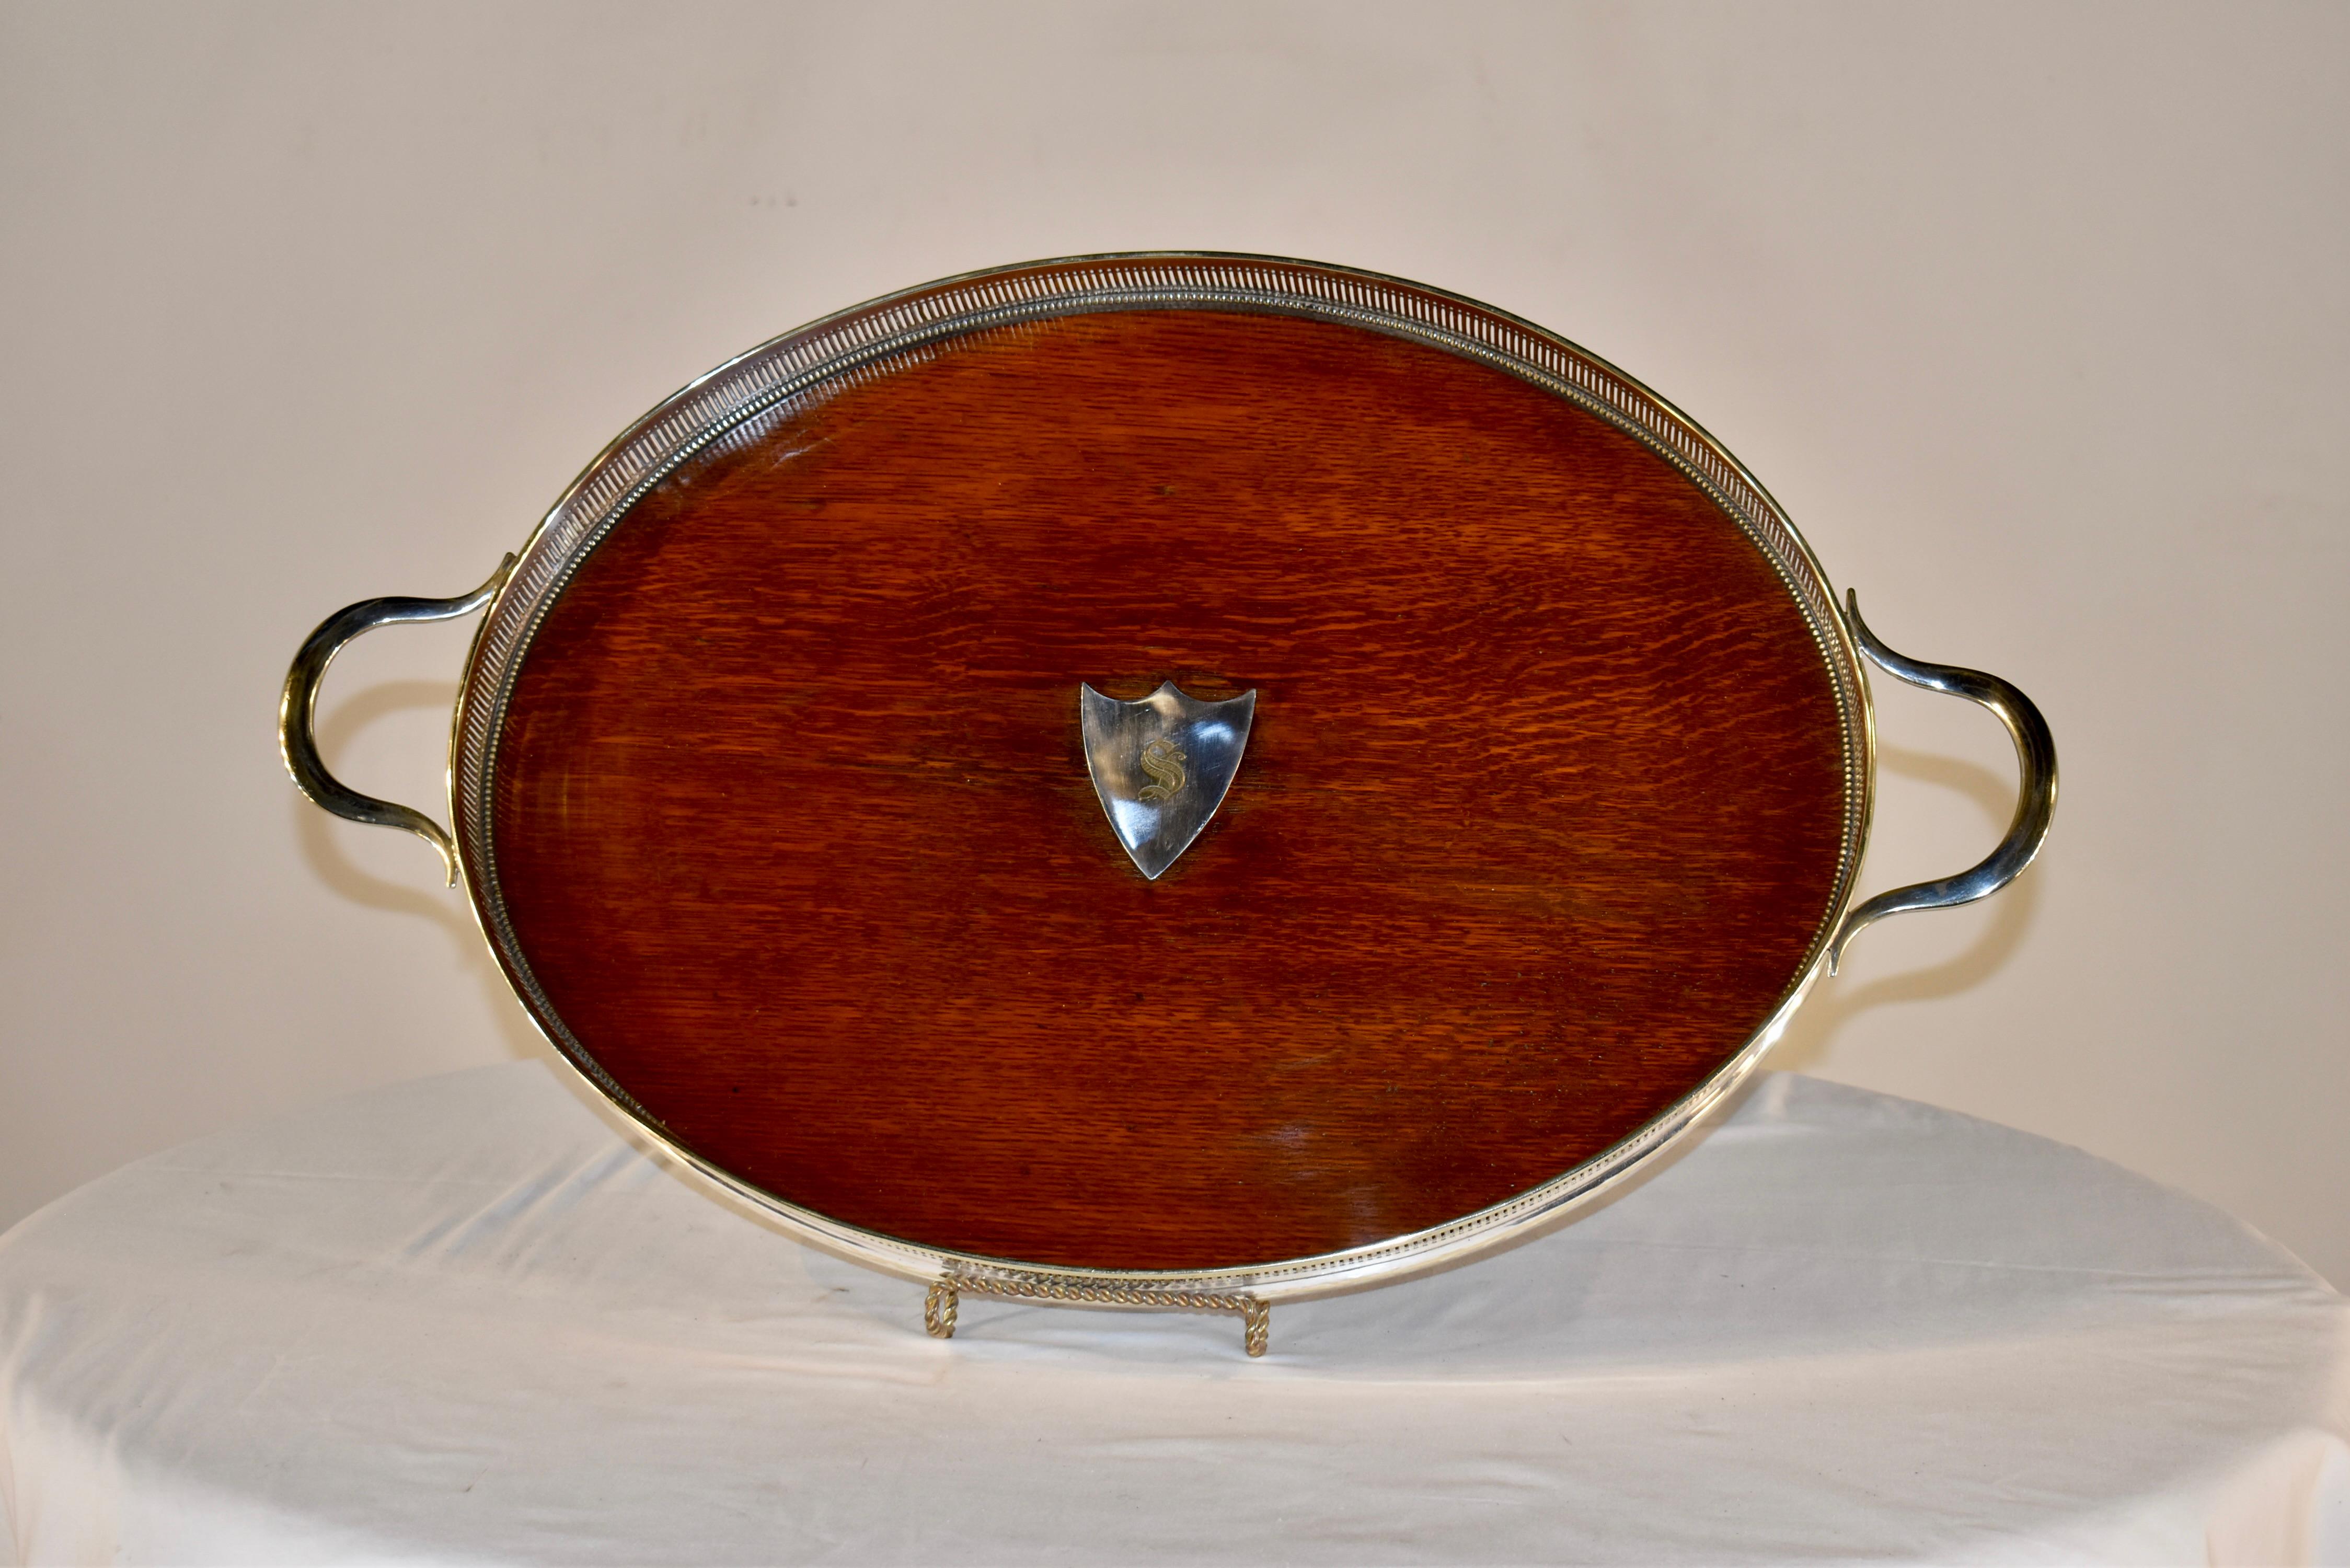 Late 19th century oak gallery tray from England. The gallery is prominent and is silver plated, along with the central shield, which is engraved with a letter S. The feet are silver plated as well. This is a wonderful and very large serving tray,